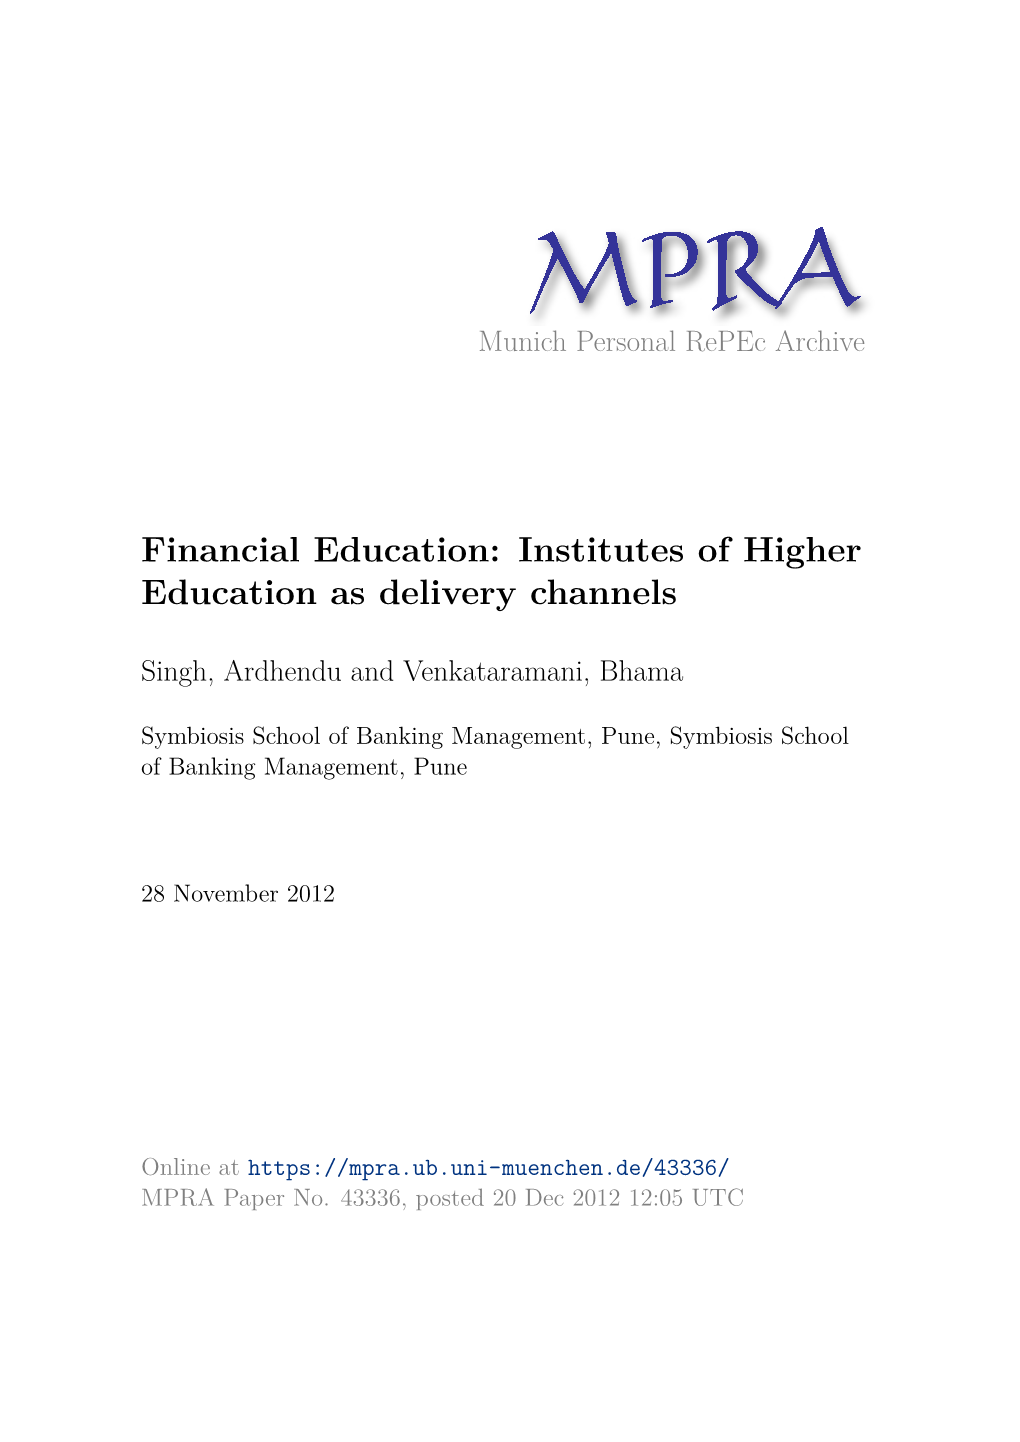 Financial Education: Institutes of Higher Education As Delivery Channels